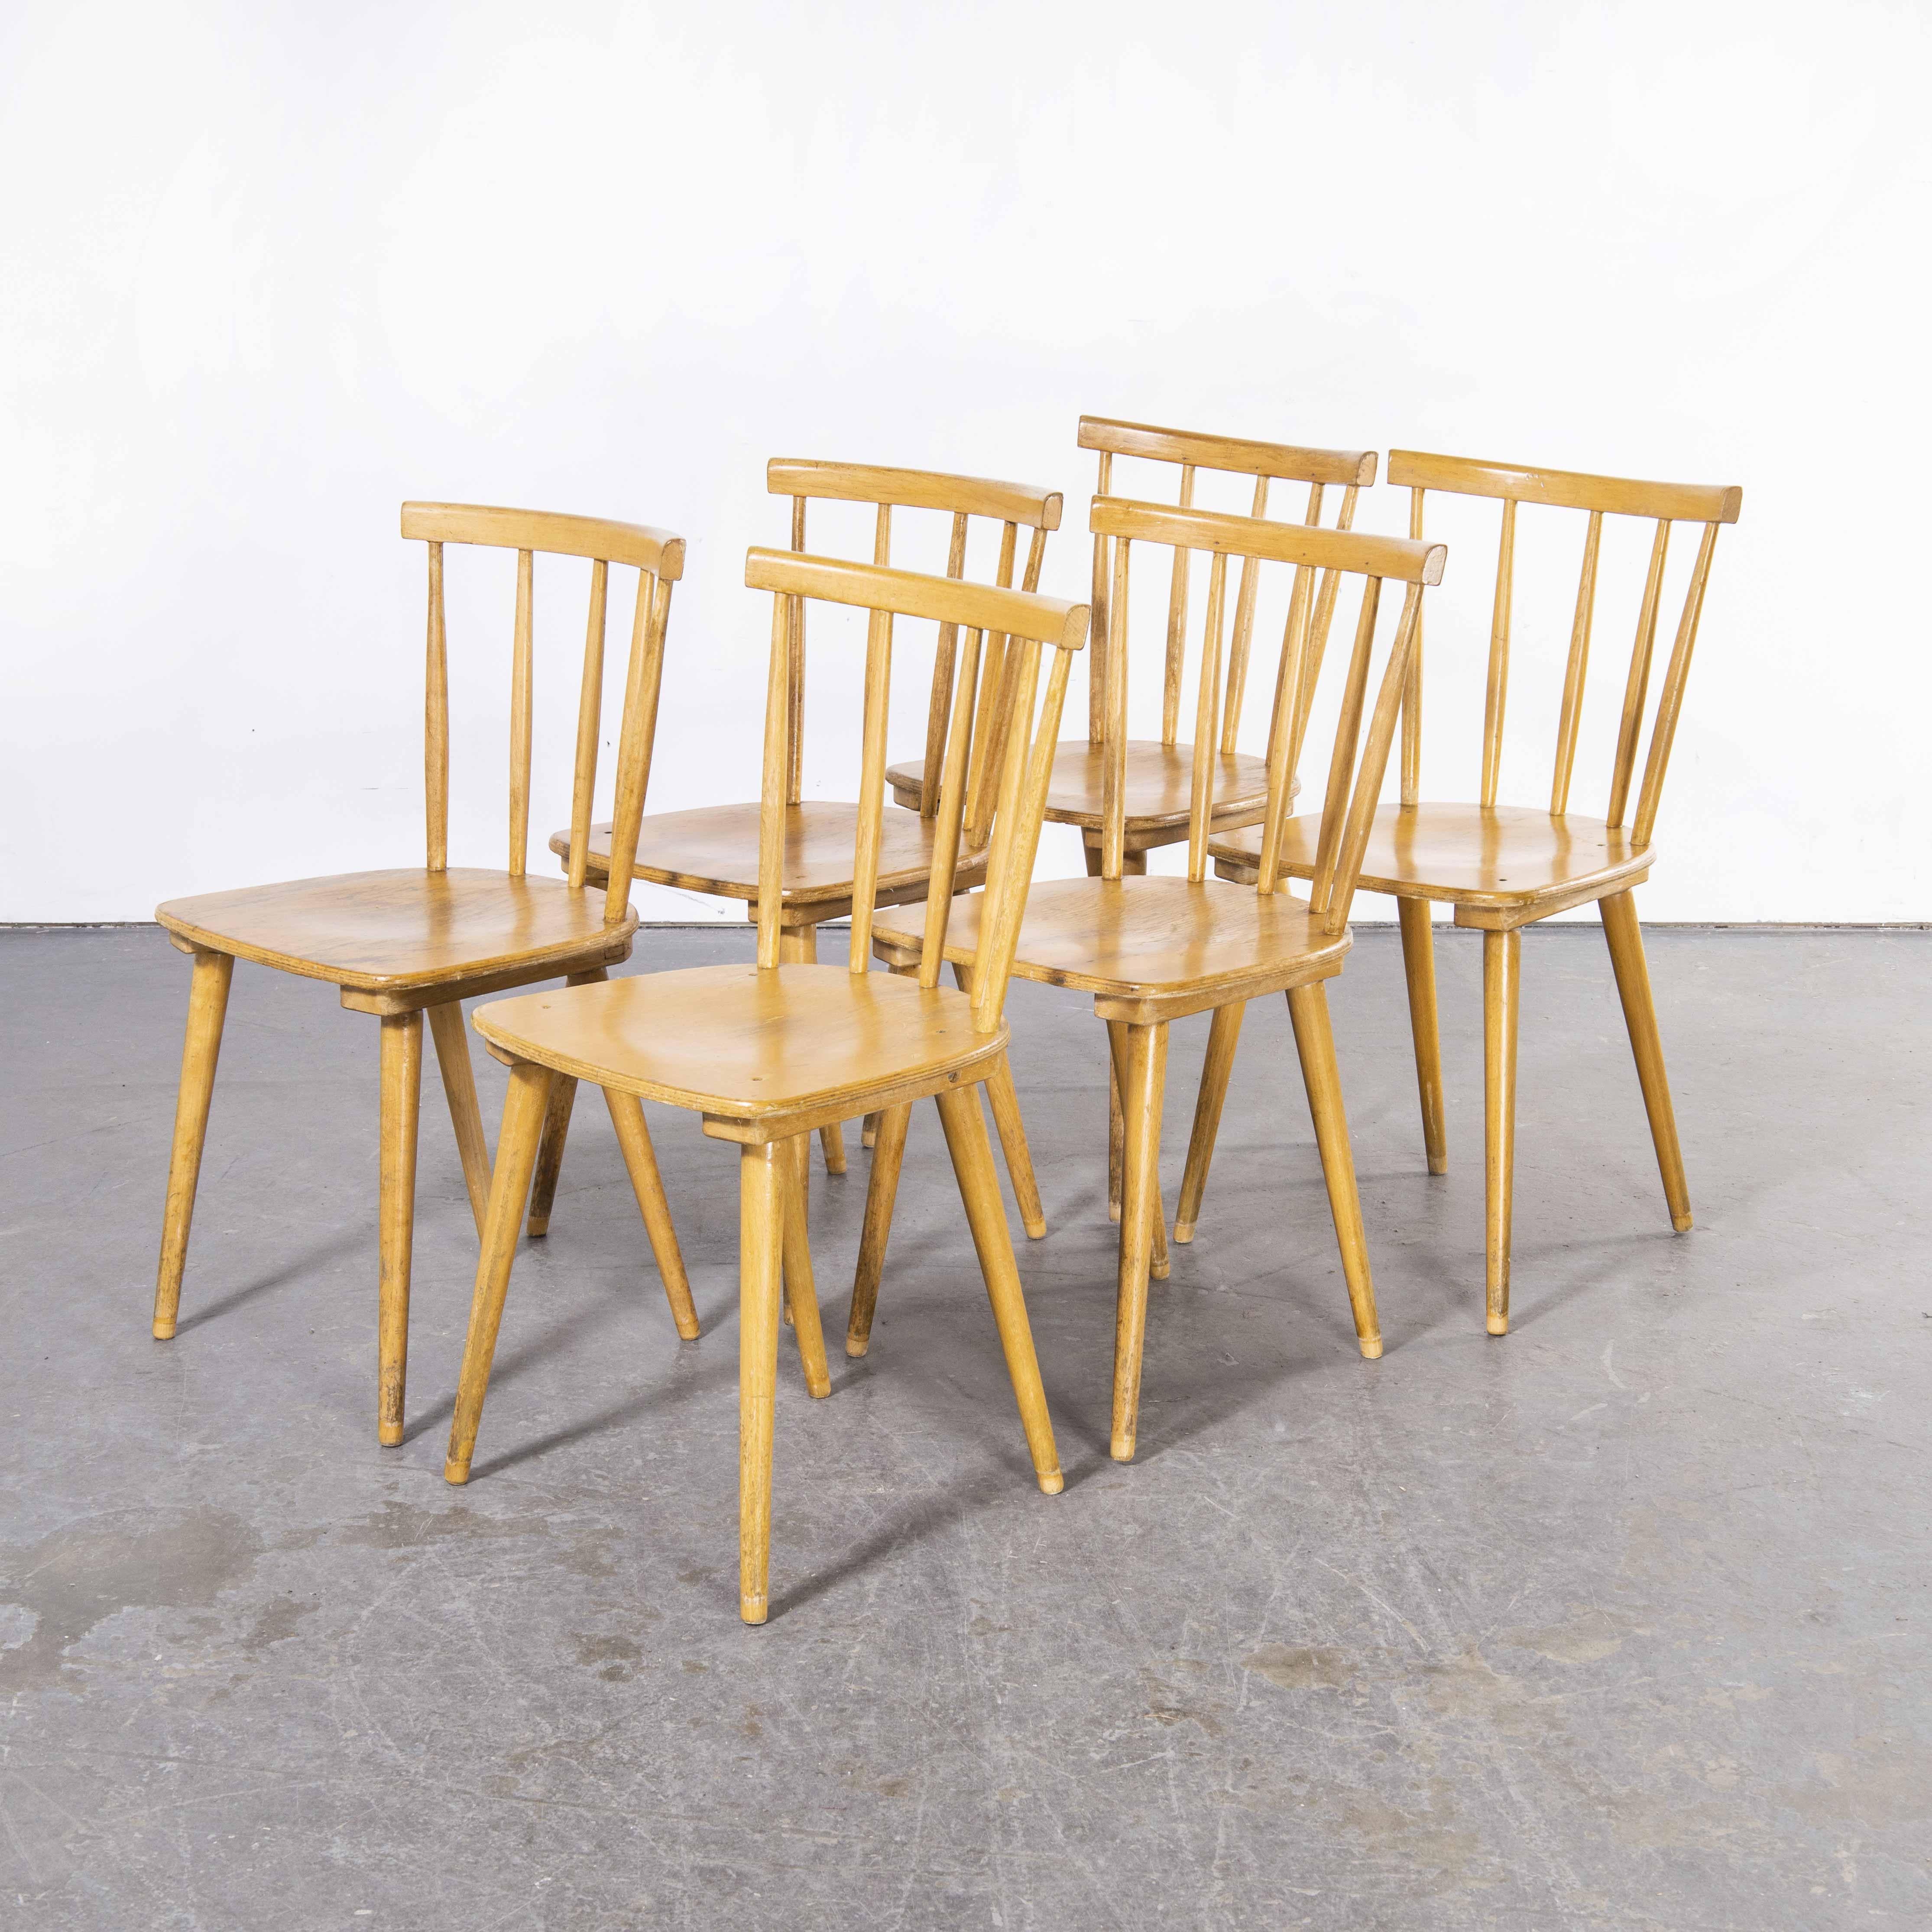 1950’s French slim back stick back dining chairs – set of six
1950’s French slim back stick back dining chairs – set of six. Classic French stick back dining chairs made in beech wood with a lovely warm colour and original character. Beautifully